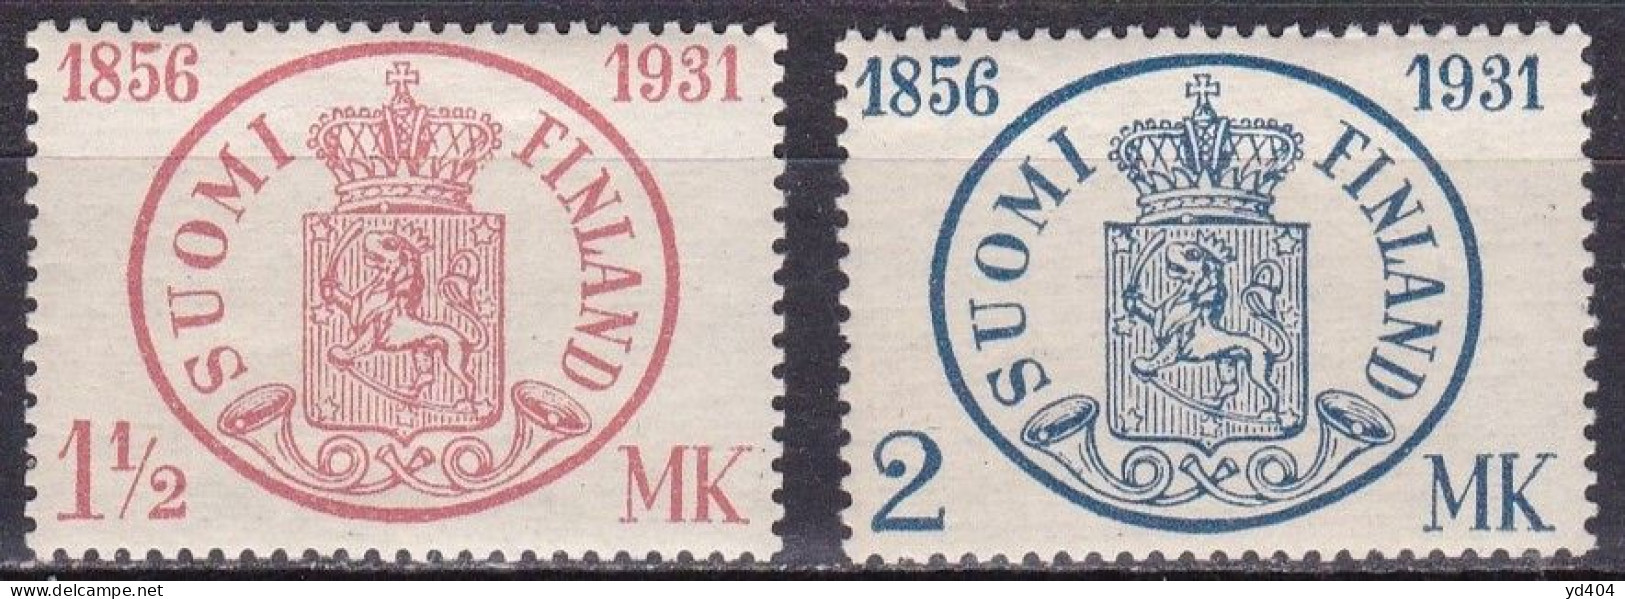 FI205 – FINLANDE – FINLAND – 1931 – ANNIV. OF FIRST STAMP – Y&T # 164/5 MNH 12,80 € - Unused Stamps